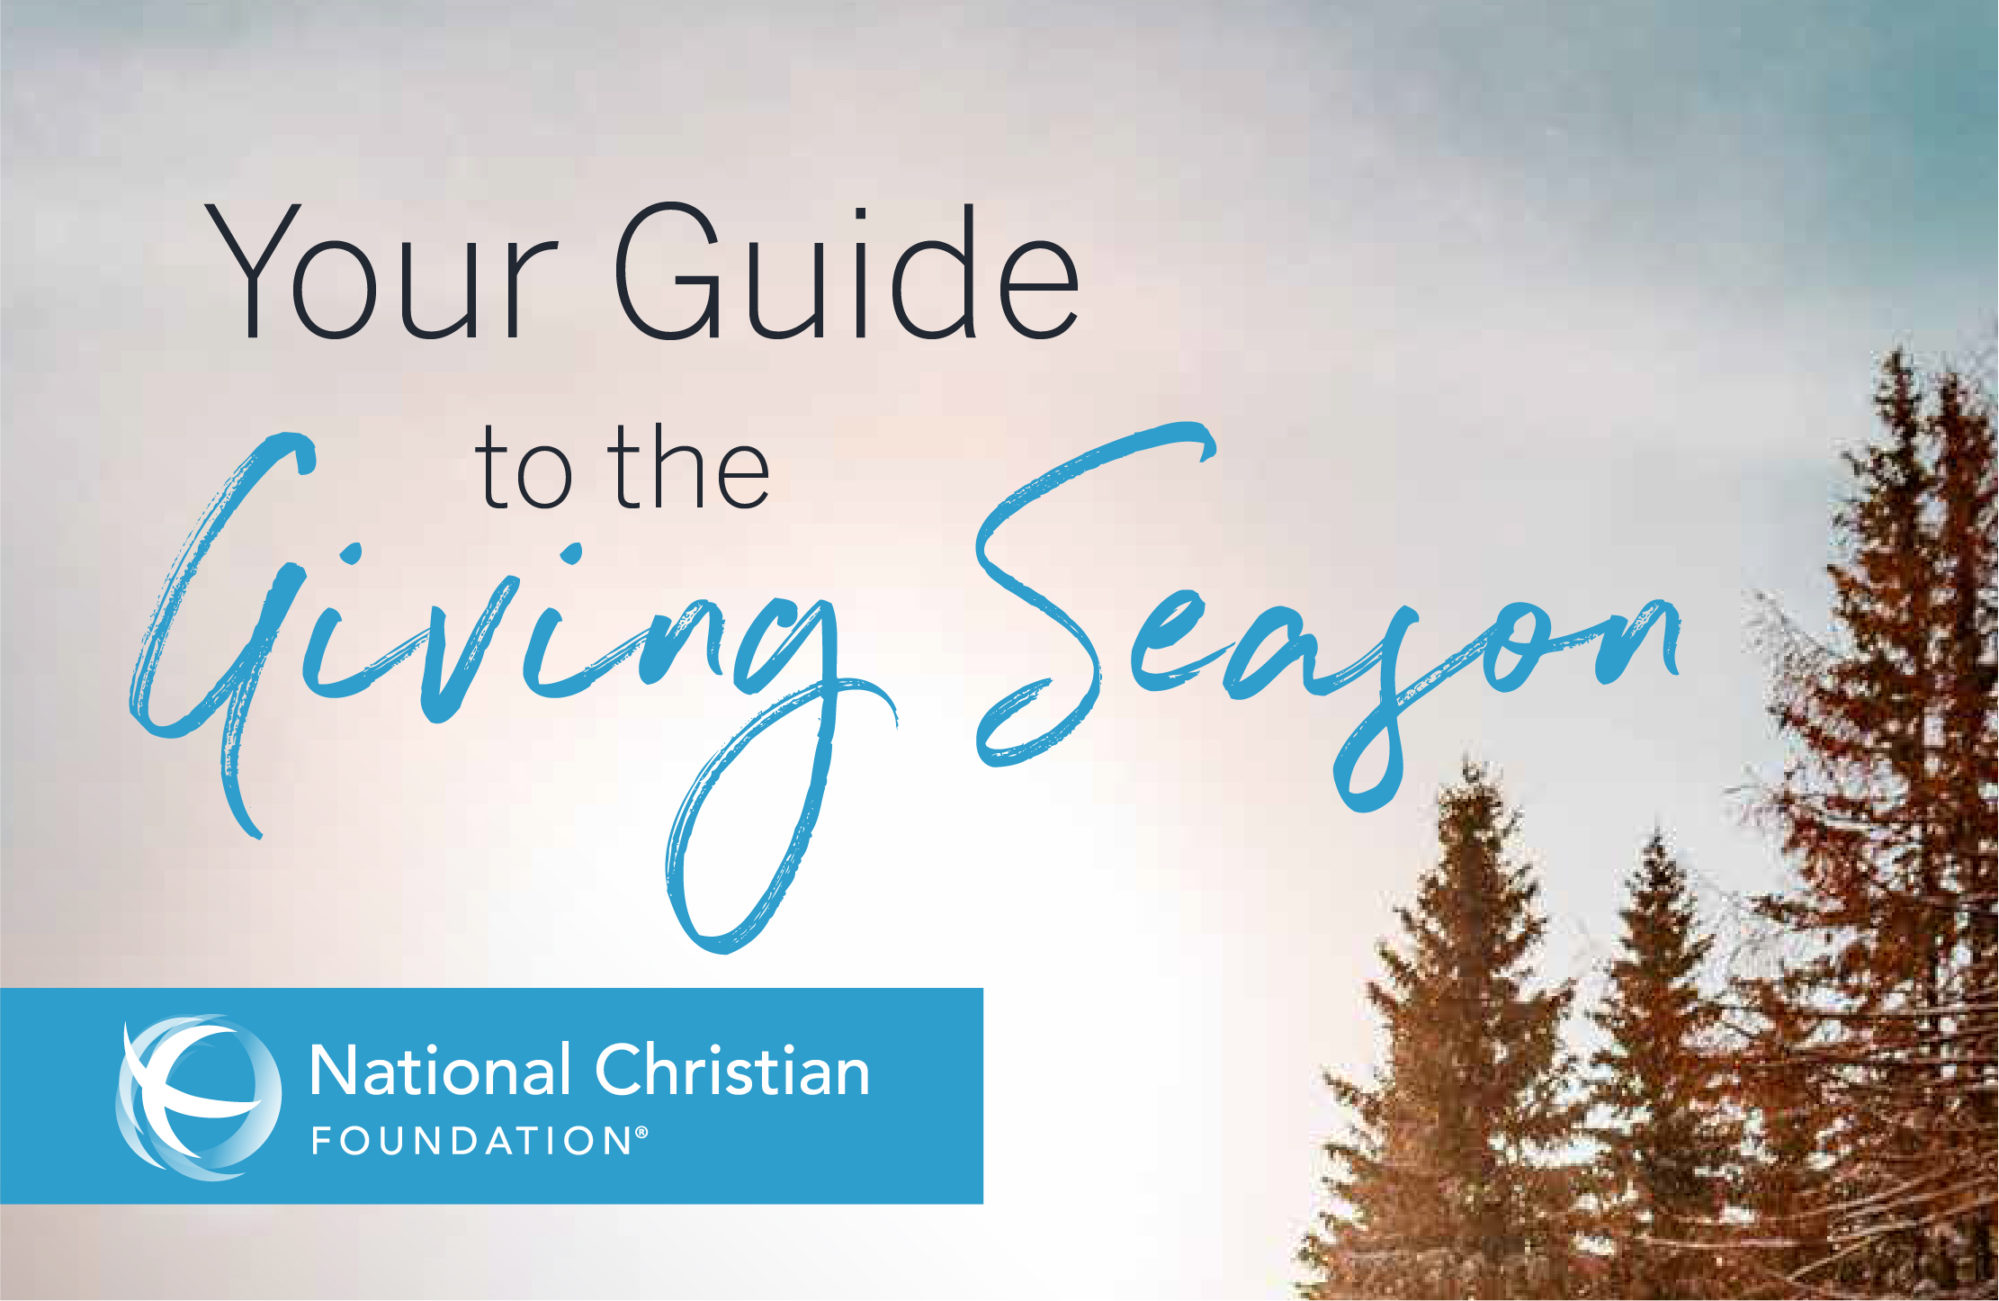 Cover Image for Your Guide to the Giving Season